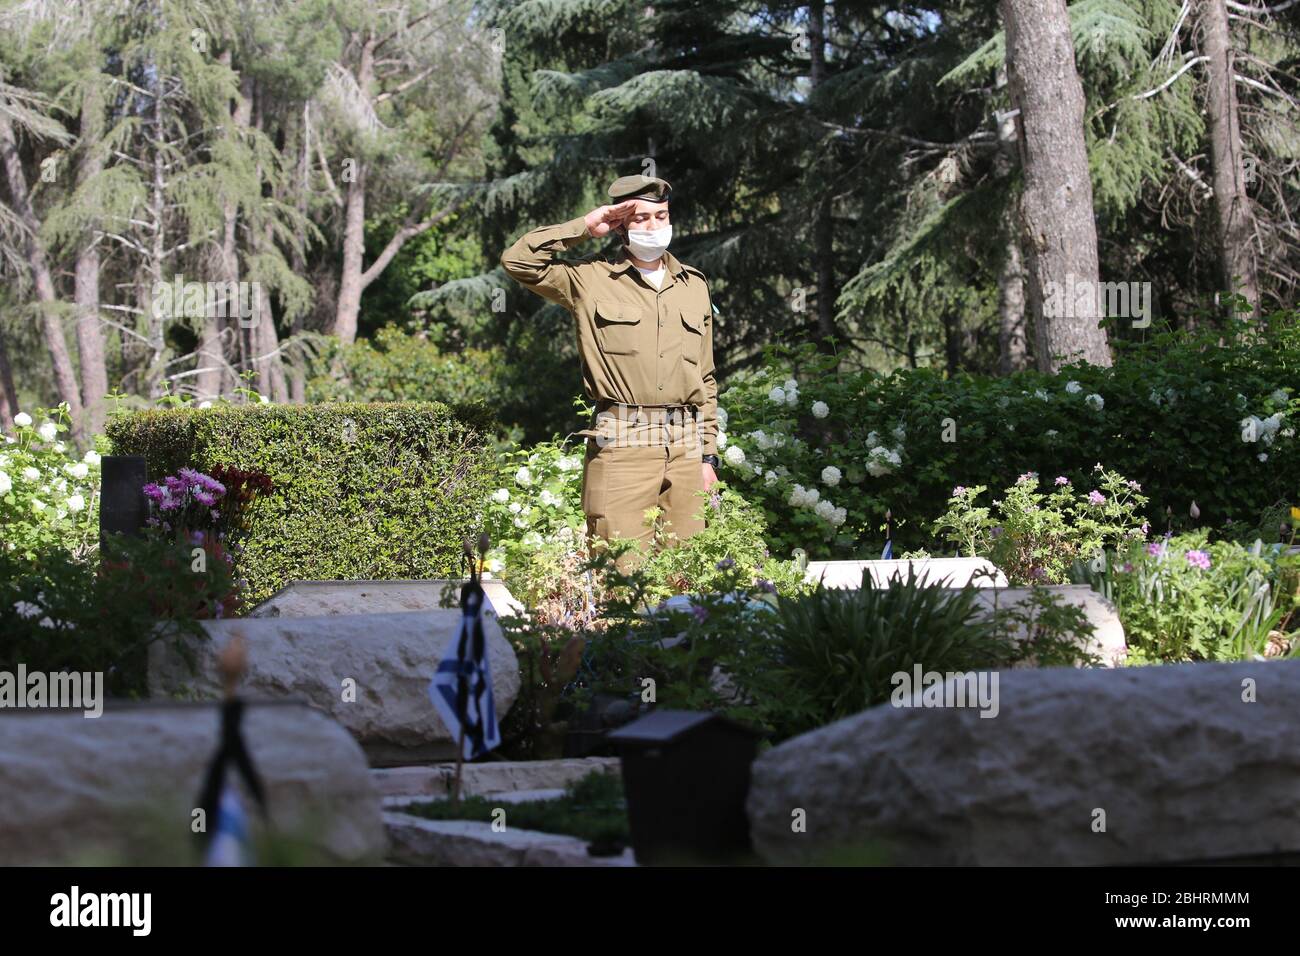 Jerusalem. 27th Apr, 2020. A soldier wearing protective mask commemorates Israeli fallen soldiers in a military cemetery in Jerusalem on April 27, 2020. Credit: Muammar Awad/Xinhua/Alamy Live News Stock Photo